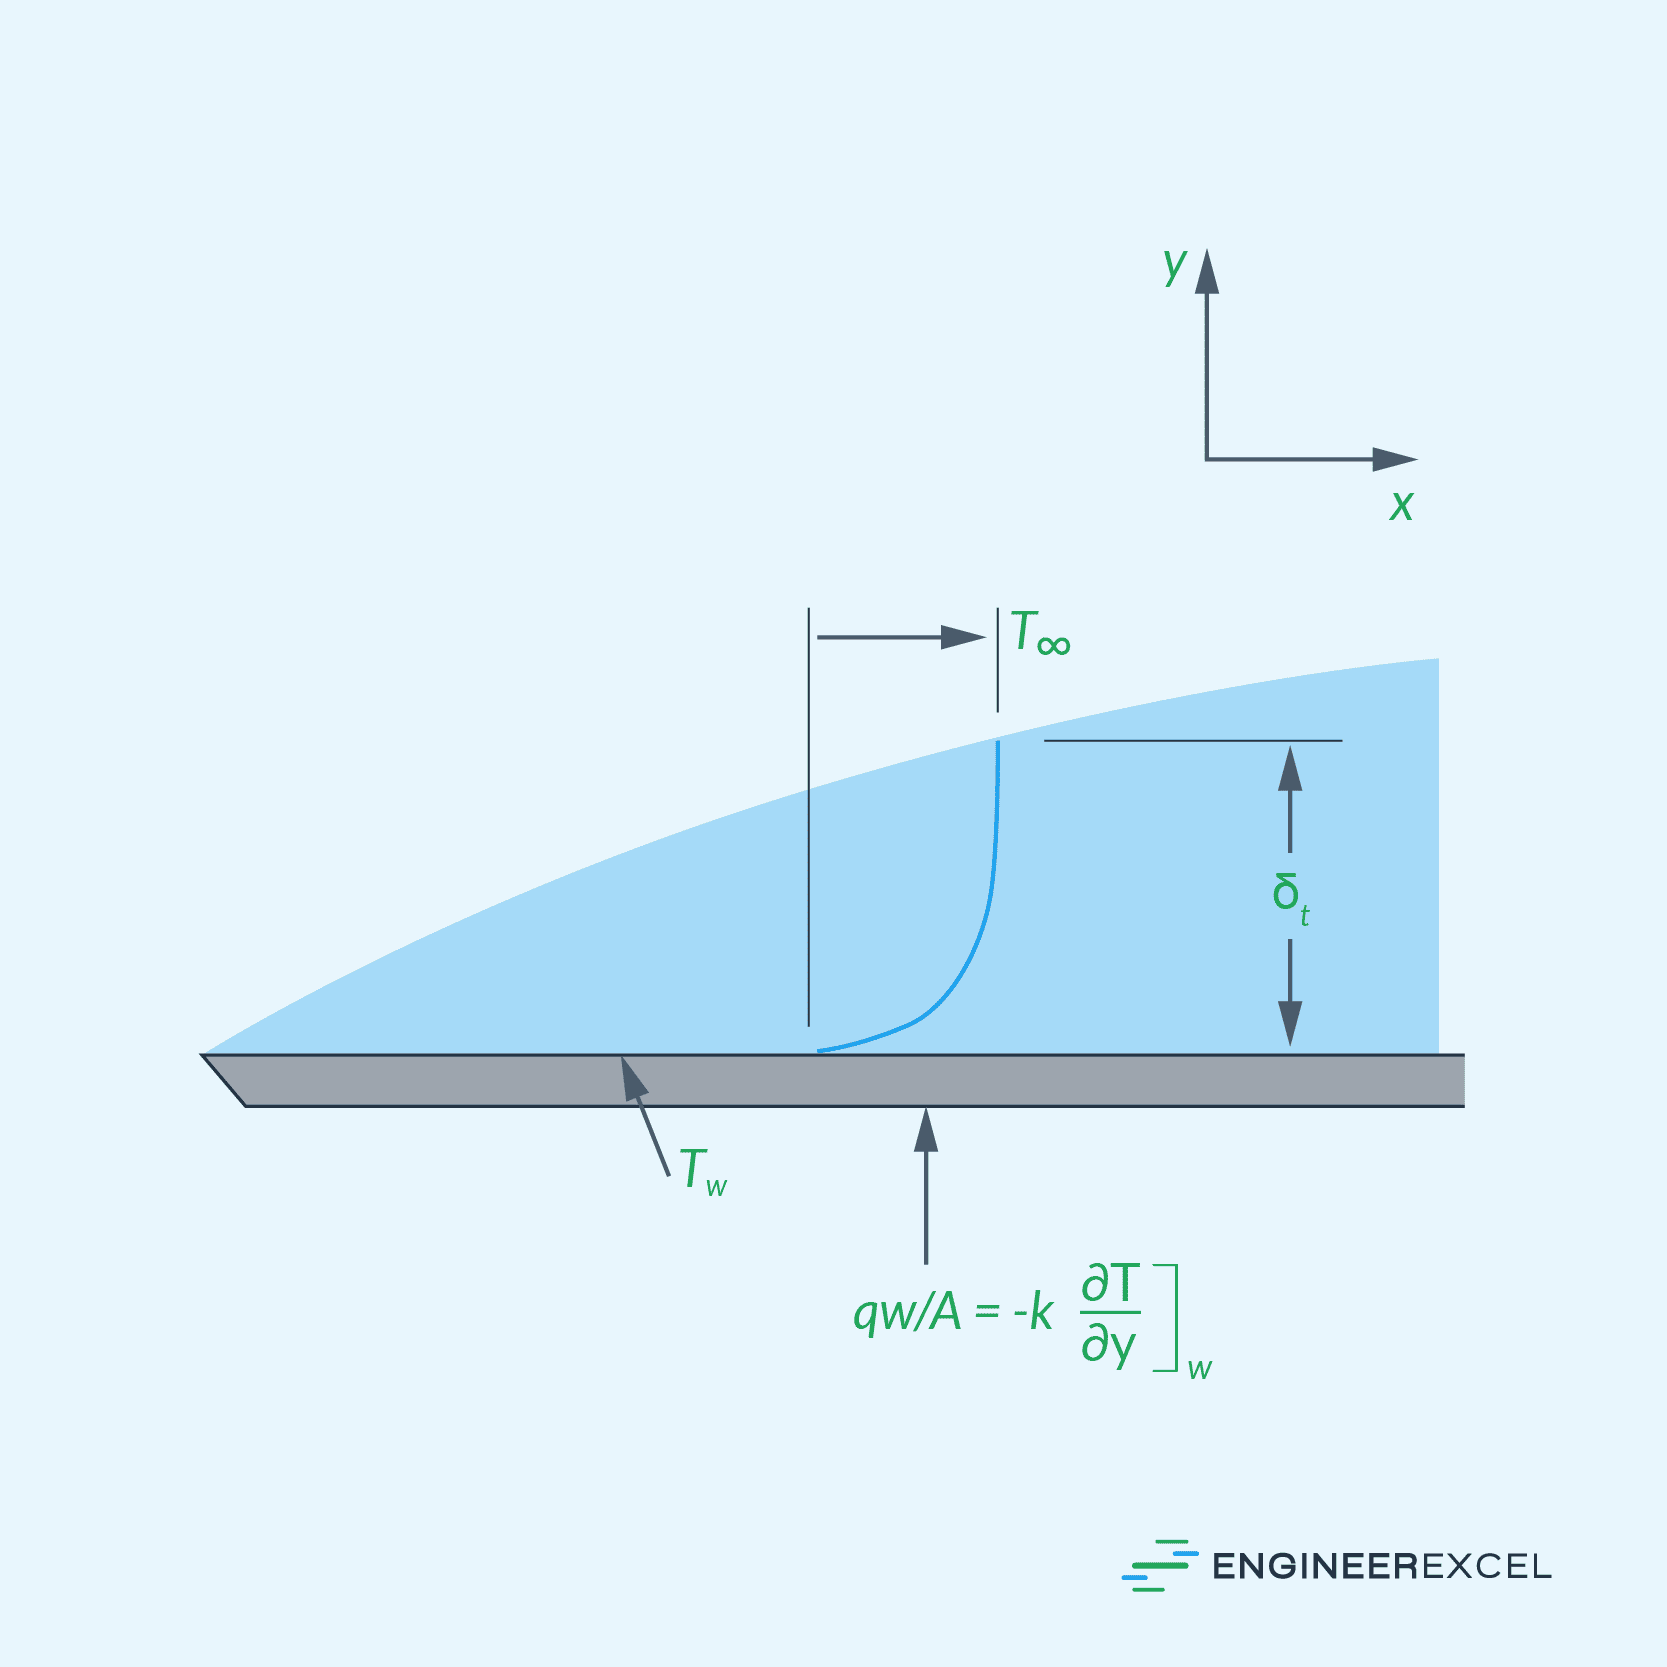 Thermal boundary layer of laminar flow over a flat plate